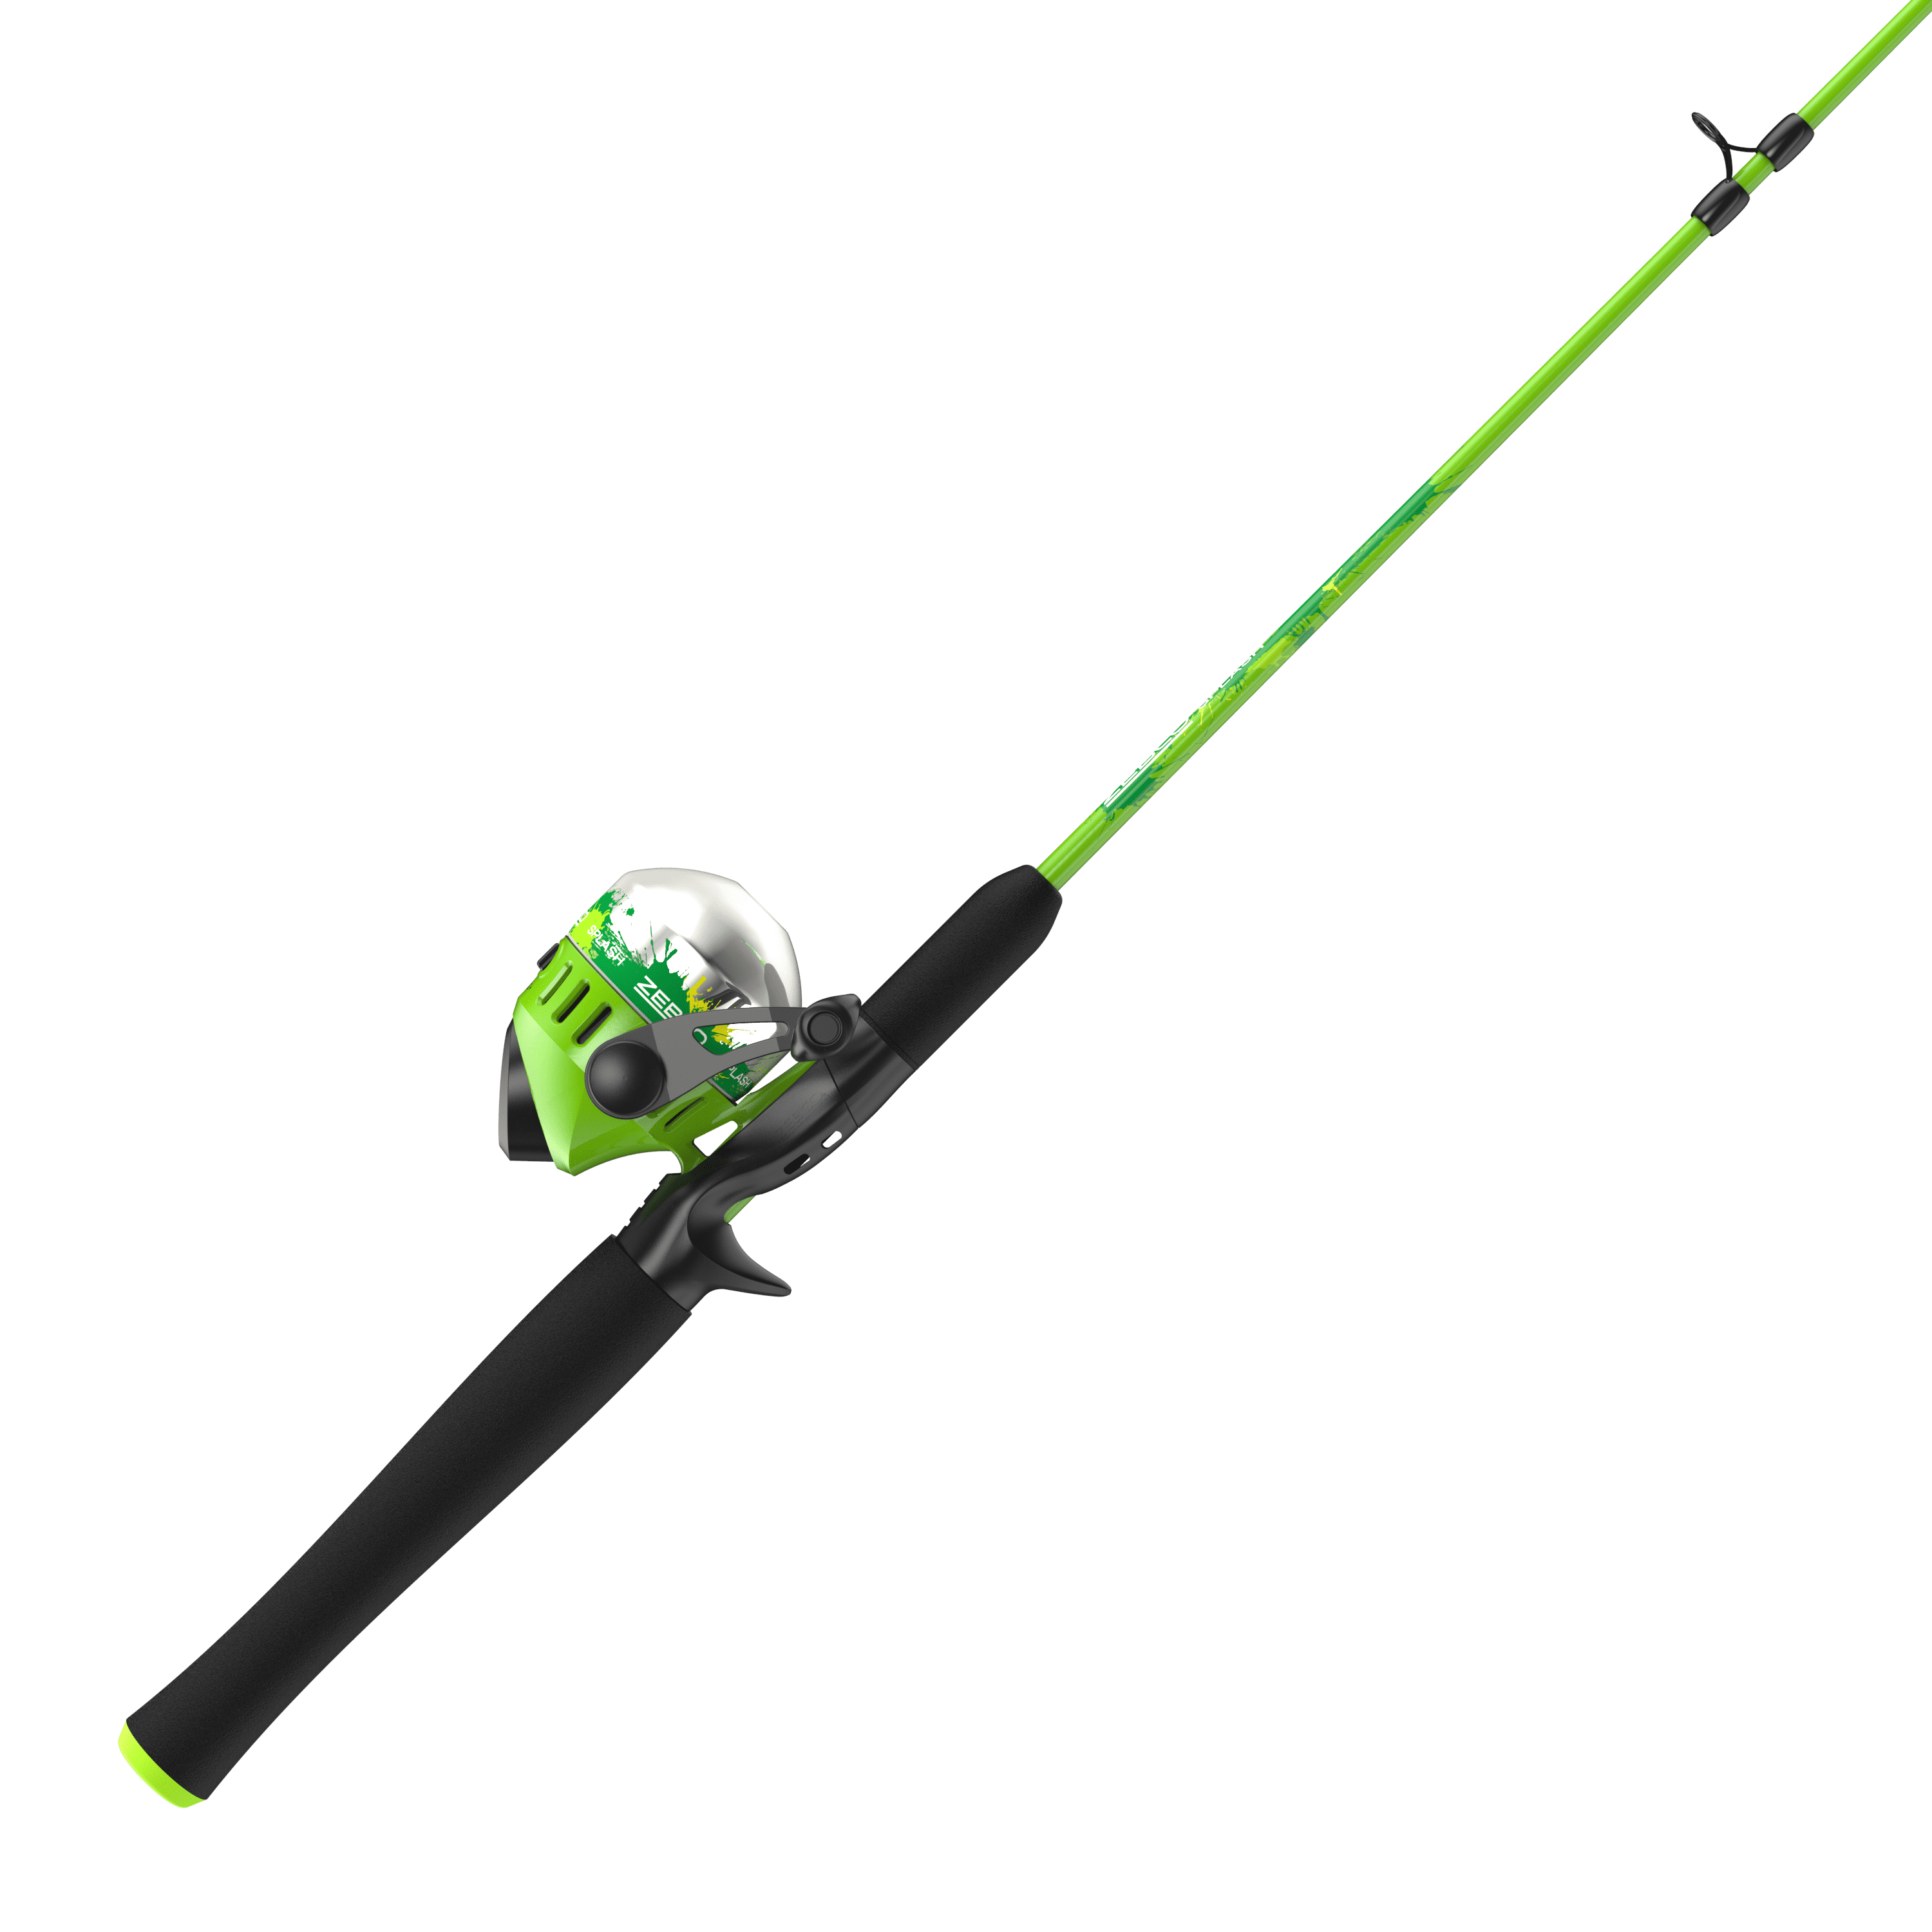  Zebco Kids Splash Jr. Spincast Reel and Fishing Rod Combo,  4-Foot 2-Piece Fishing Pole, Size 20 Reel, Right-Hand Retrieve, Pre-Spooled  with 6-Pound Cajun Line, Blue : Sports & Outdoors